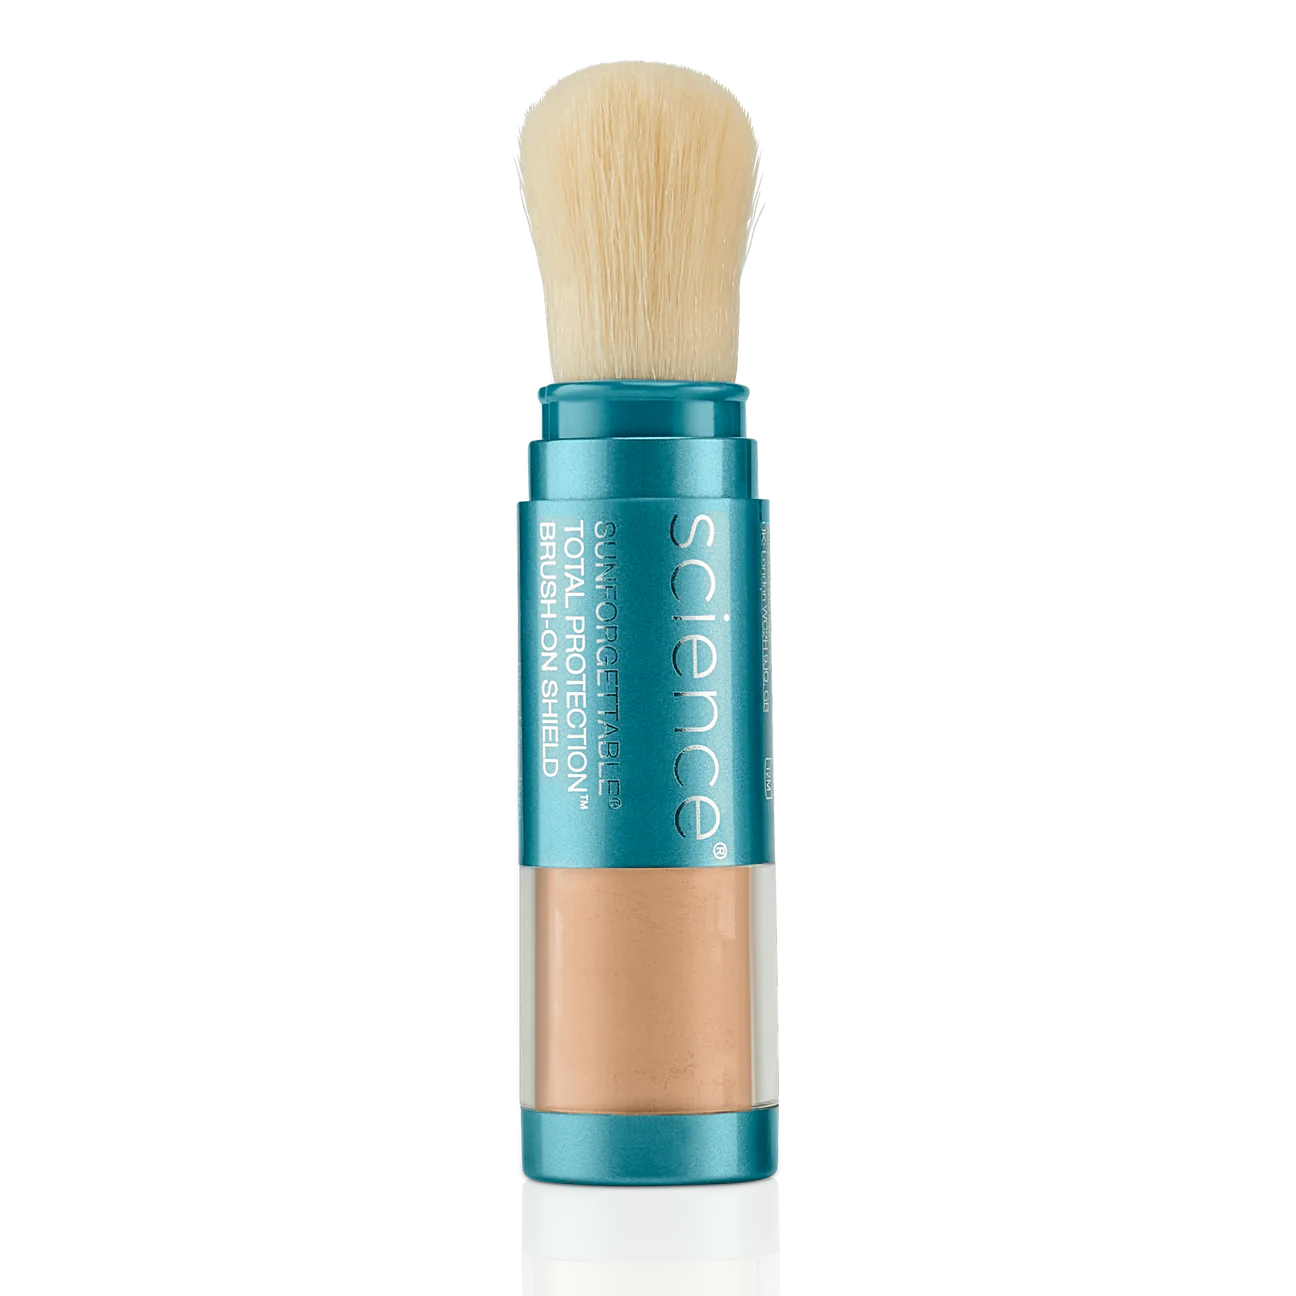 Colorescience Sunforgettable Total Protection Brush-On Shield SPF 50 in Medium